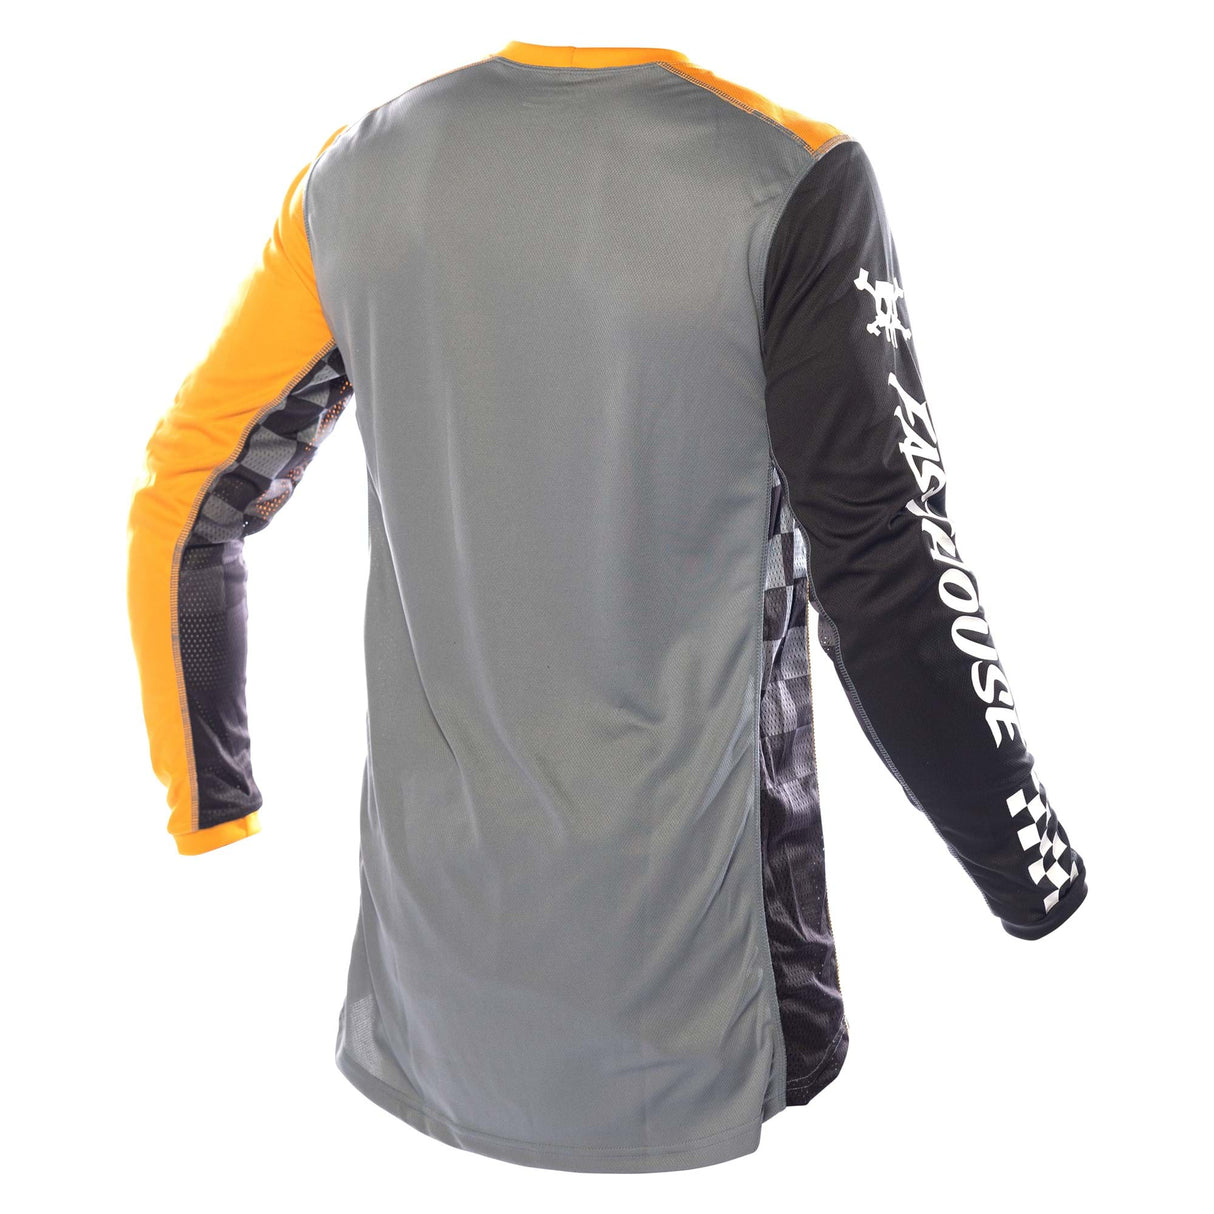 Fasthouse Grindhouse Alpha Long Sleeve Jersey